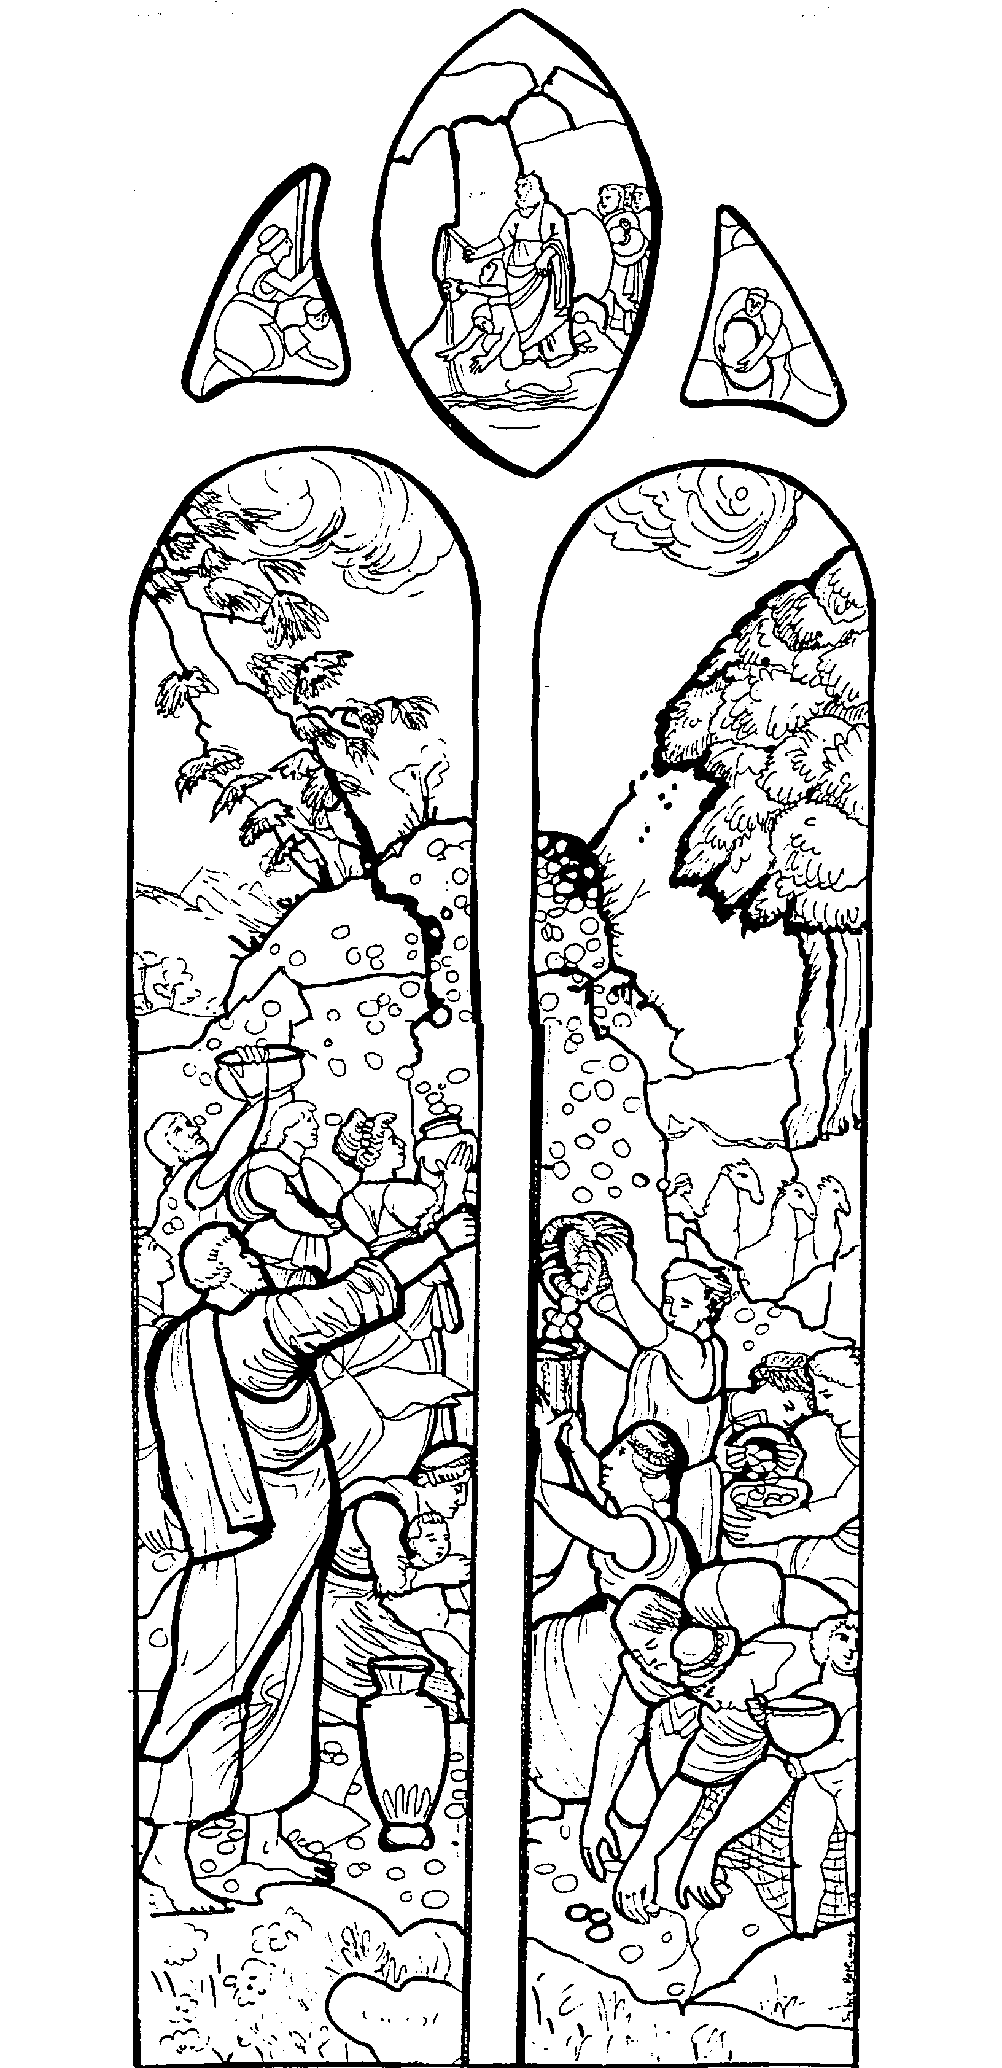 Difficult Coloring page of a very high stained glass of a mystical scene